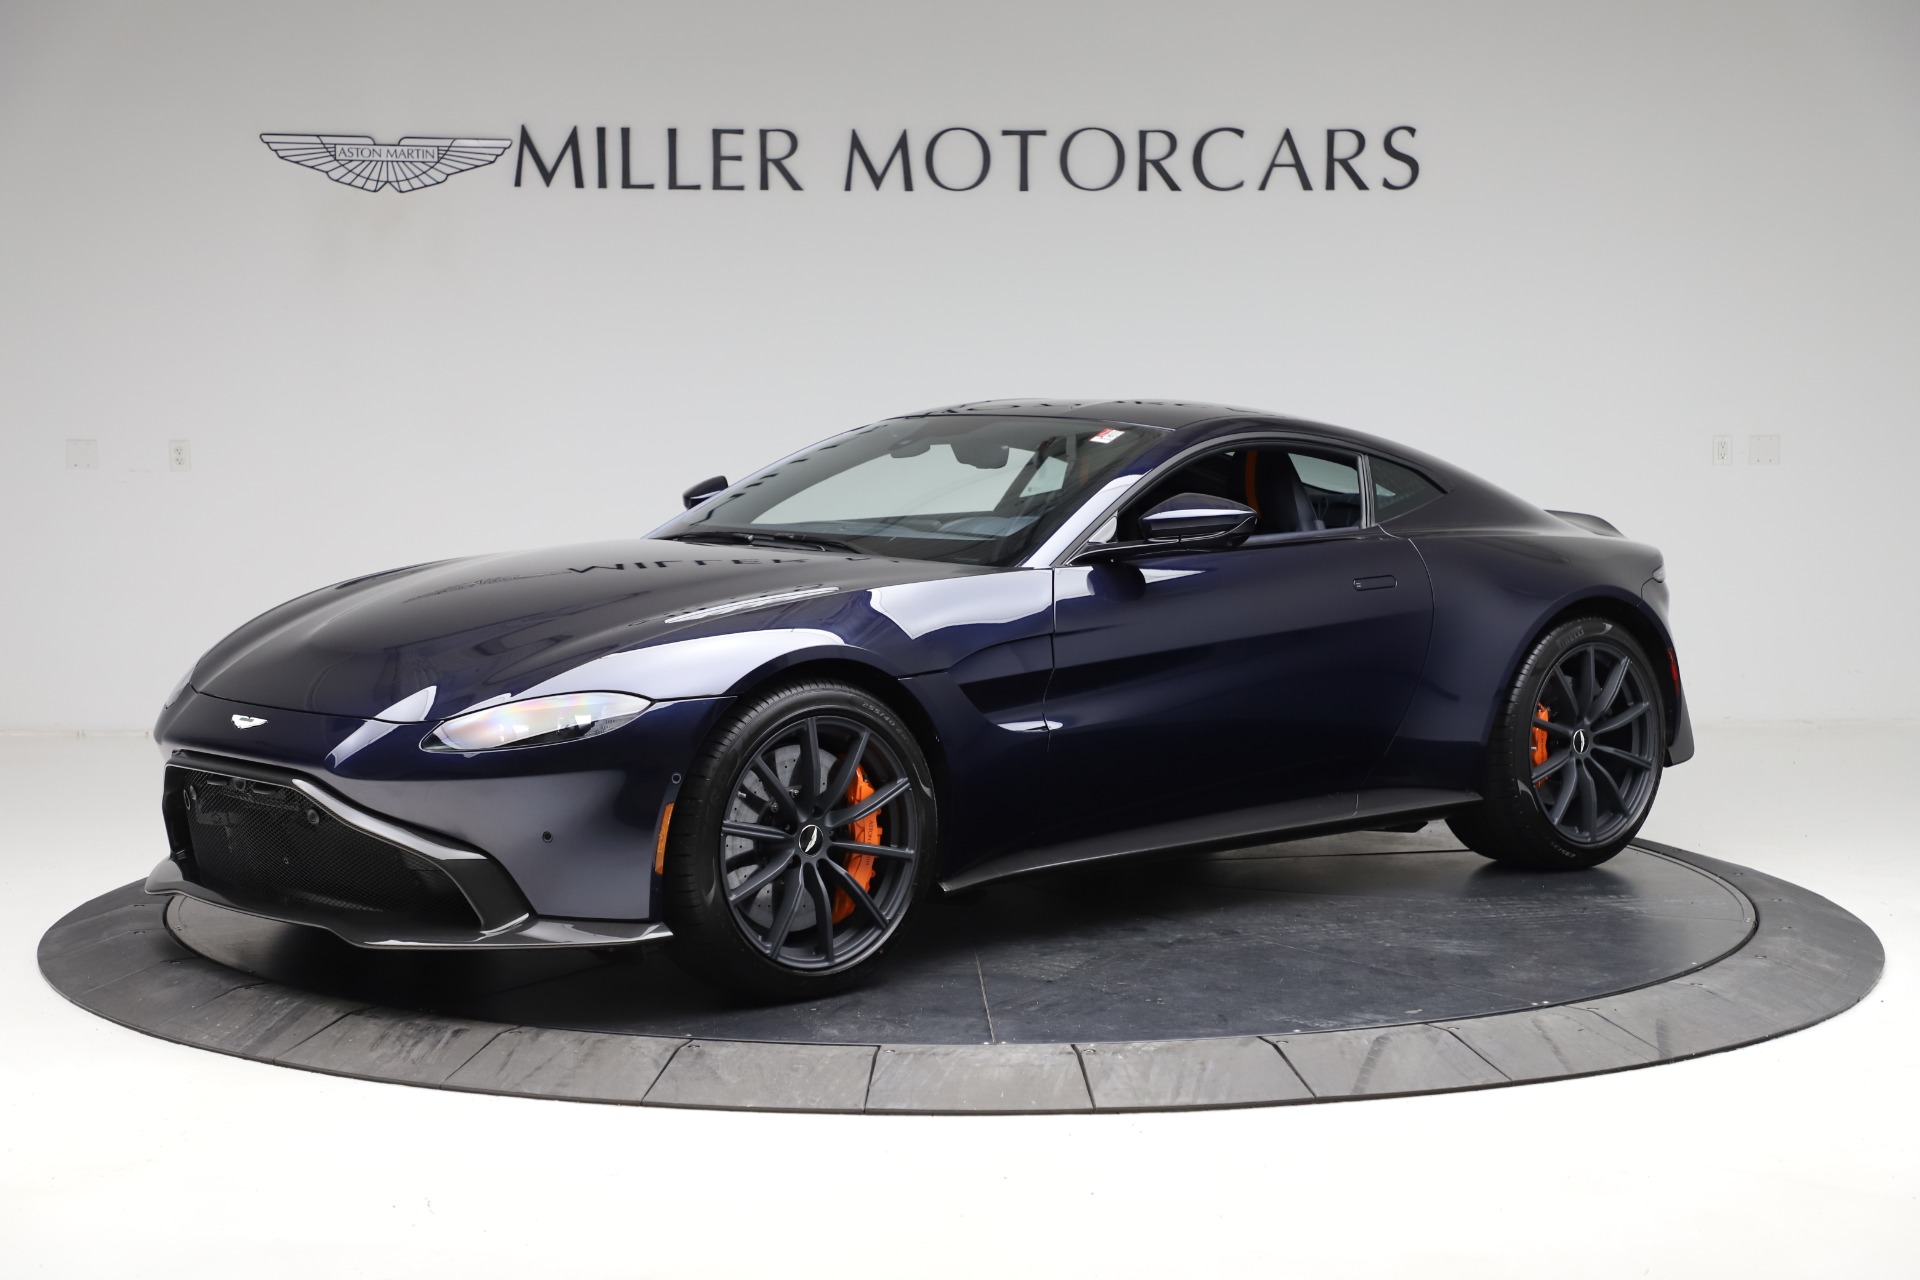 New 2020 Aston Martin Vantage AMR Coupe for sale Sold at Alfa Romeo of Westport in Westport CT 06880 1